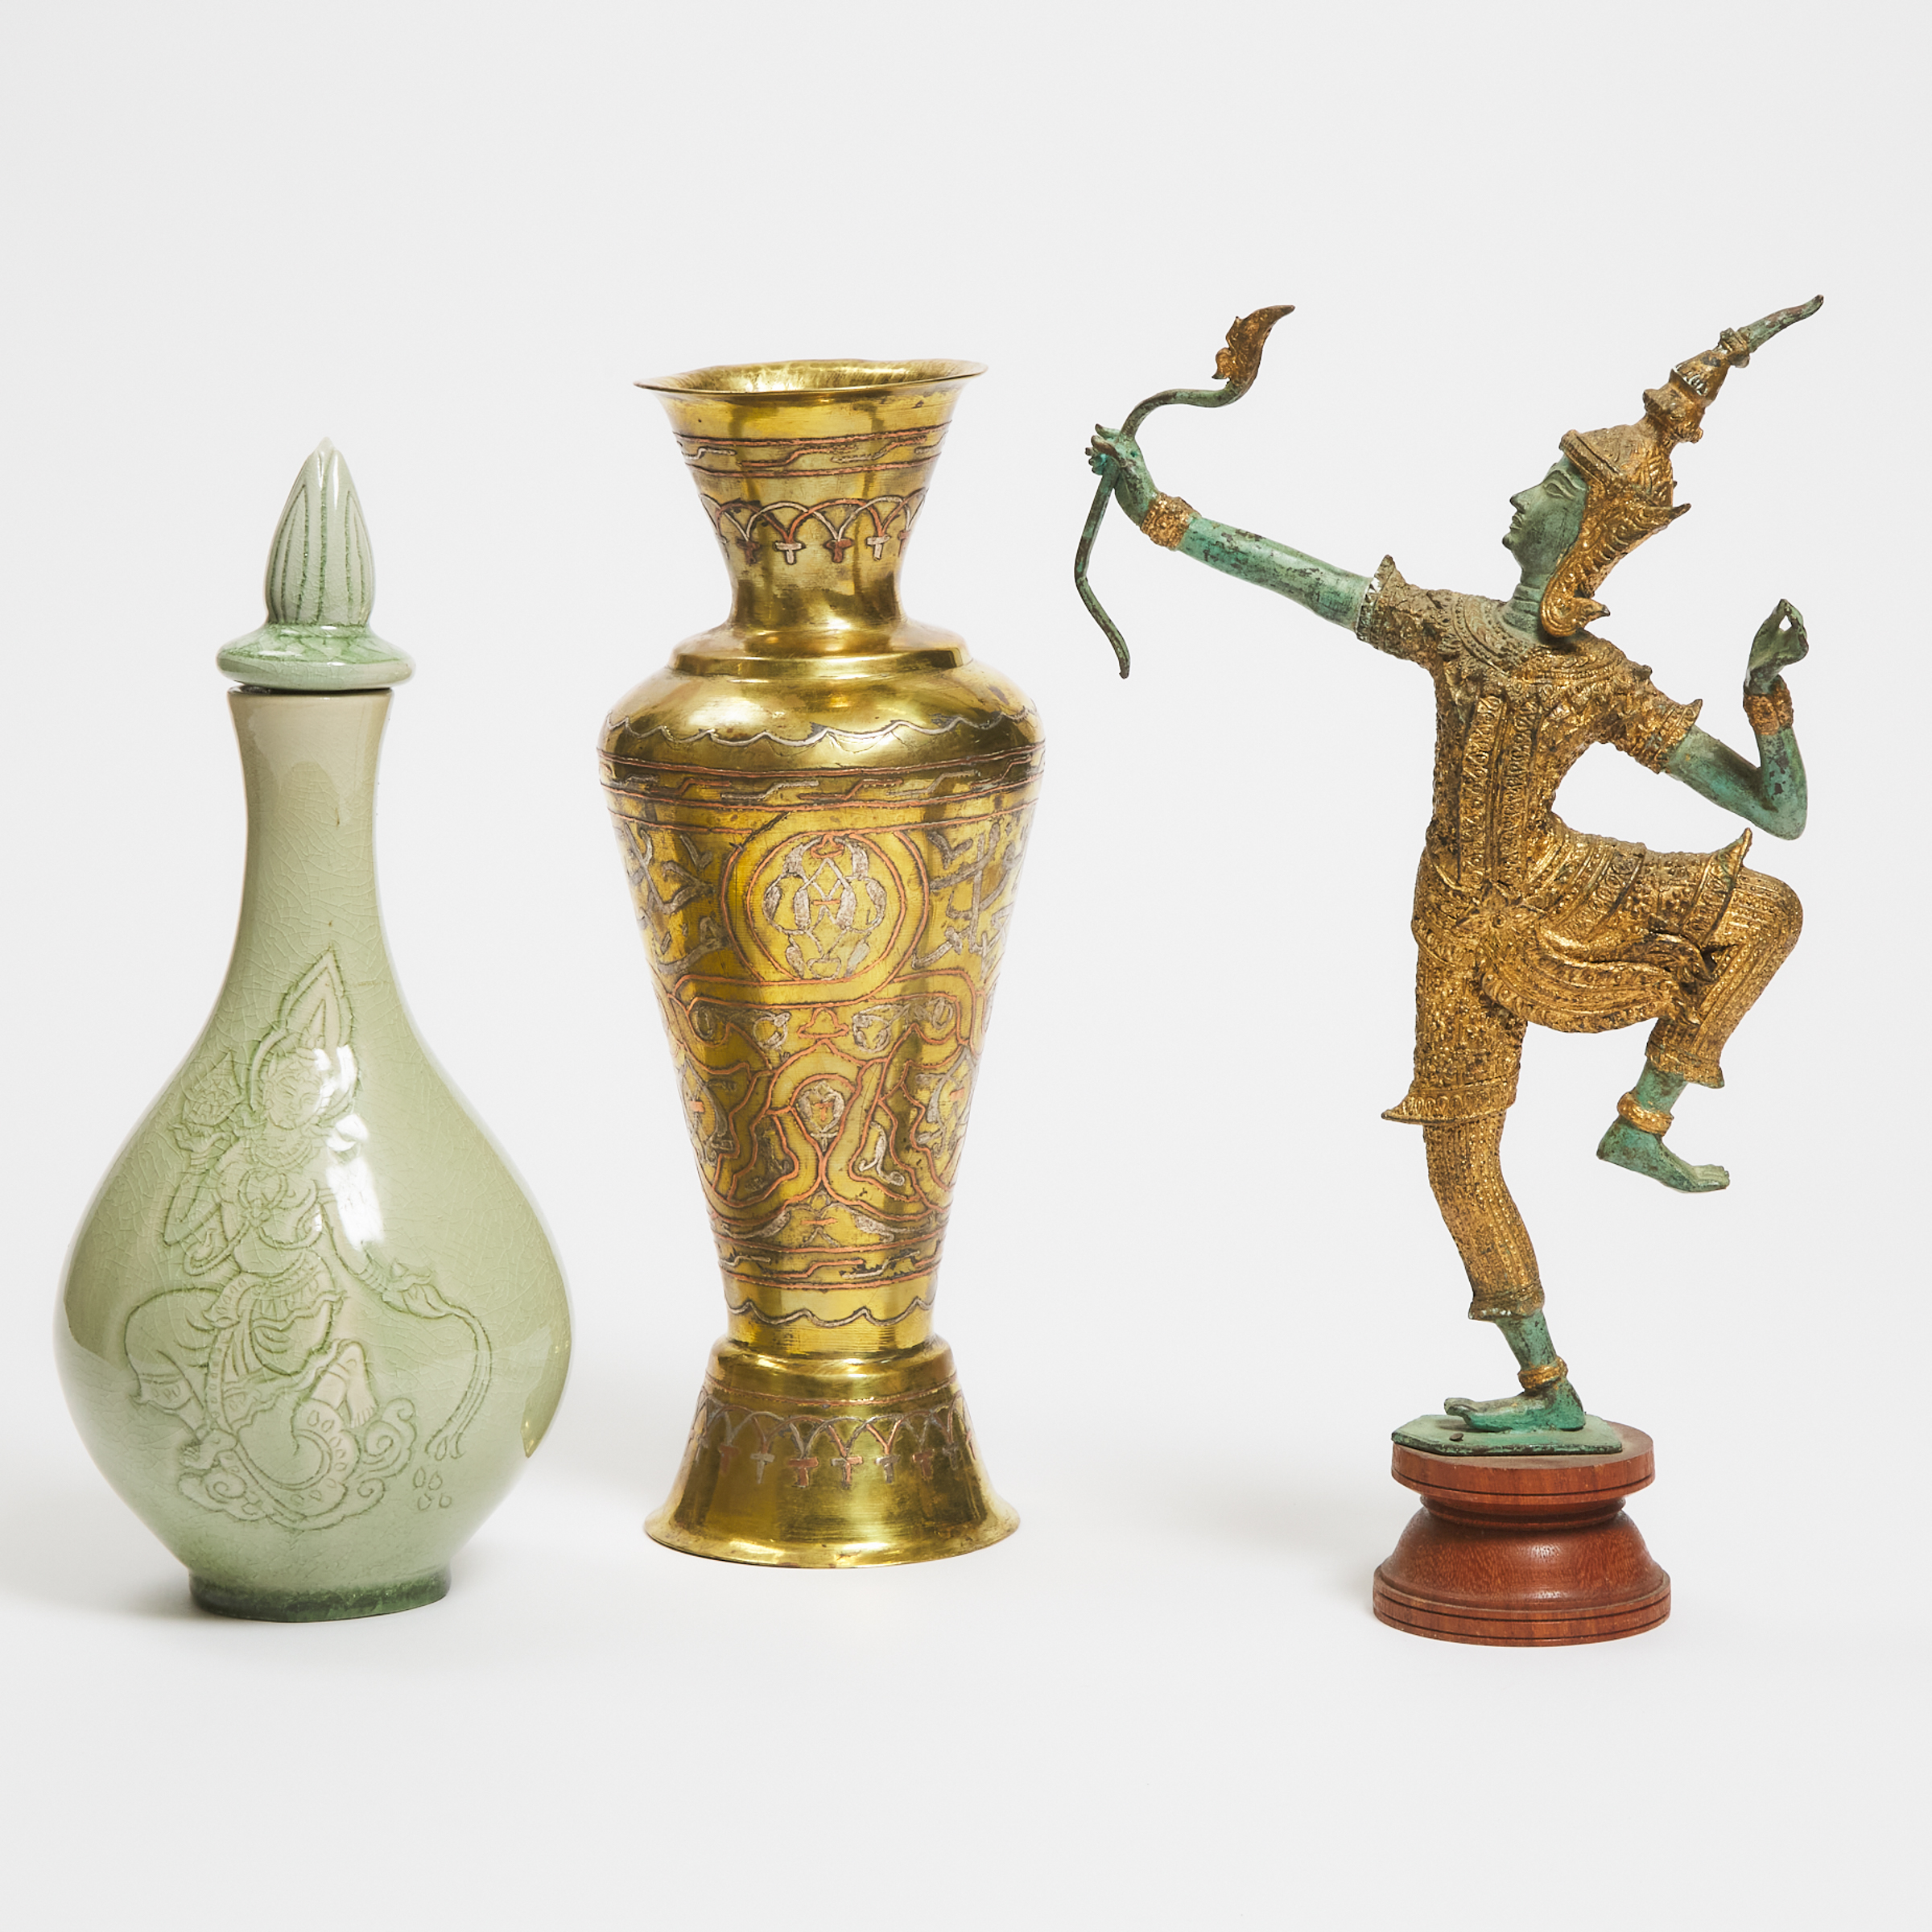 A Thai Celadon Vase and Stopper, Together With a Thai Bronze Figure of an Archer and a Persian Inlaid Brass Vase, 19th/20th Century